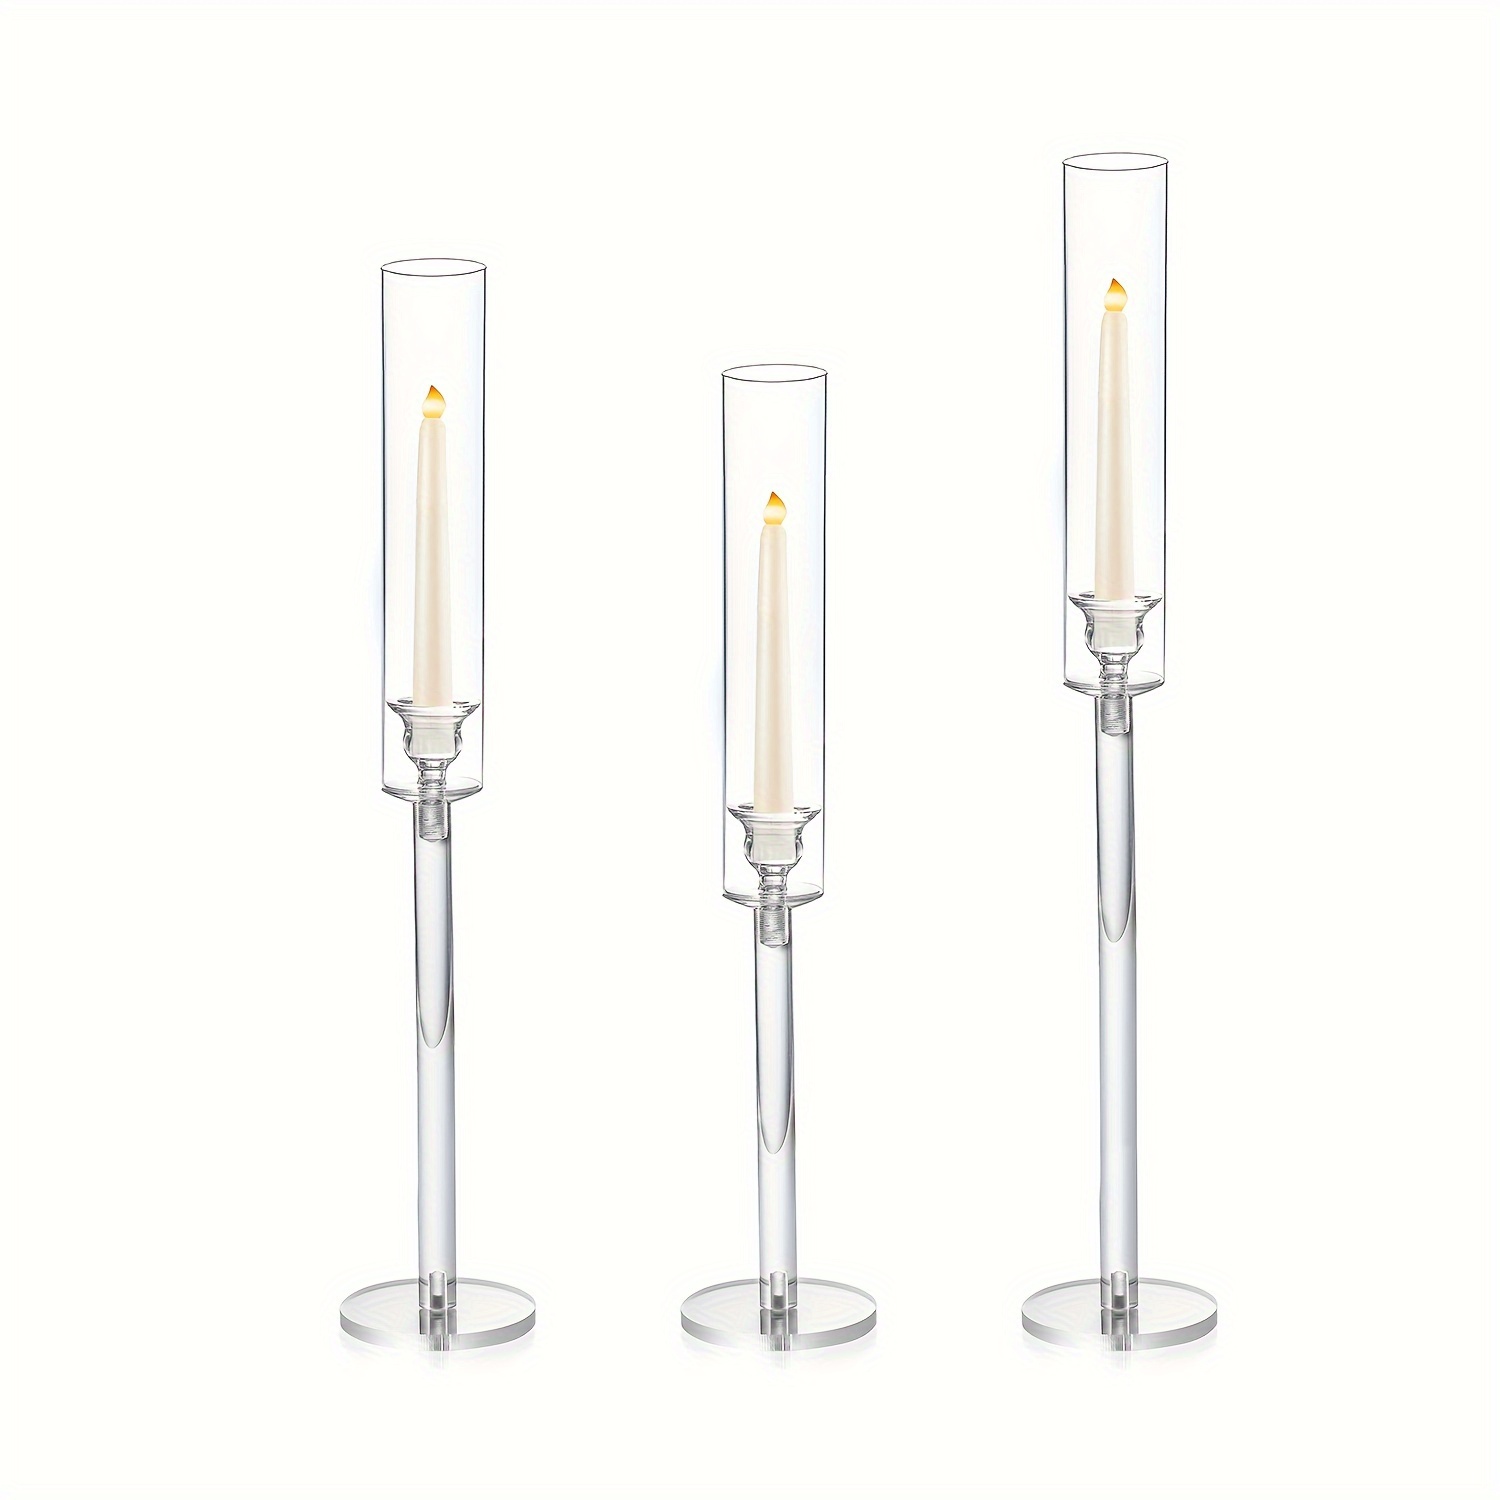 

Set Of 3 Acrylic Candle Holder For Table Centerpieces, Candlestick Holders For Wedding Living Room Decor, Use For Flameless Led Taper Candles